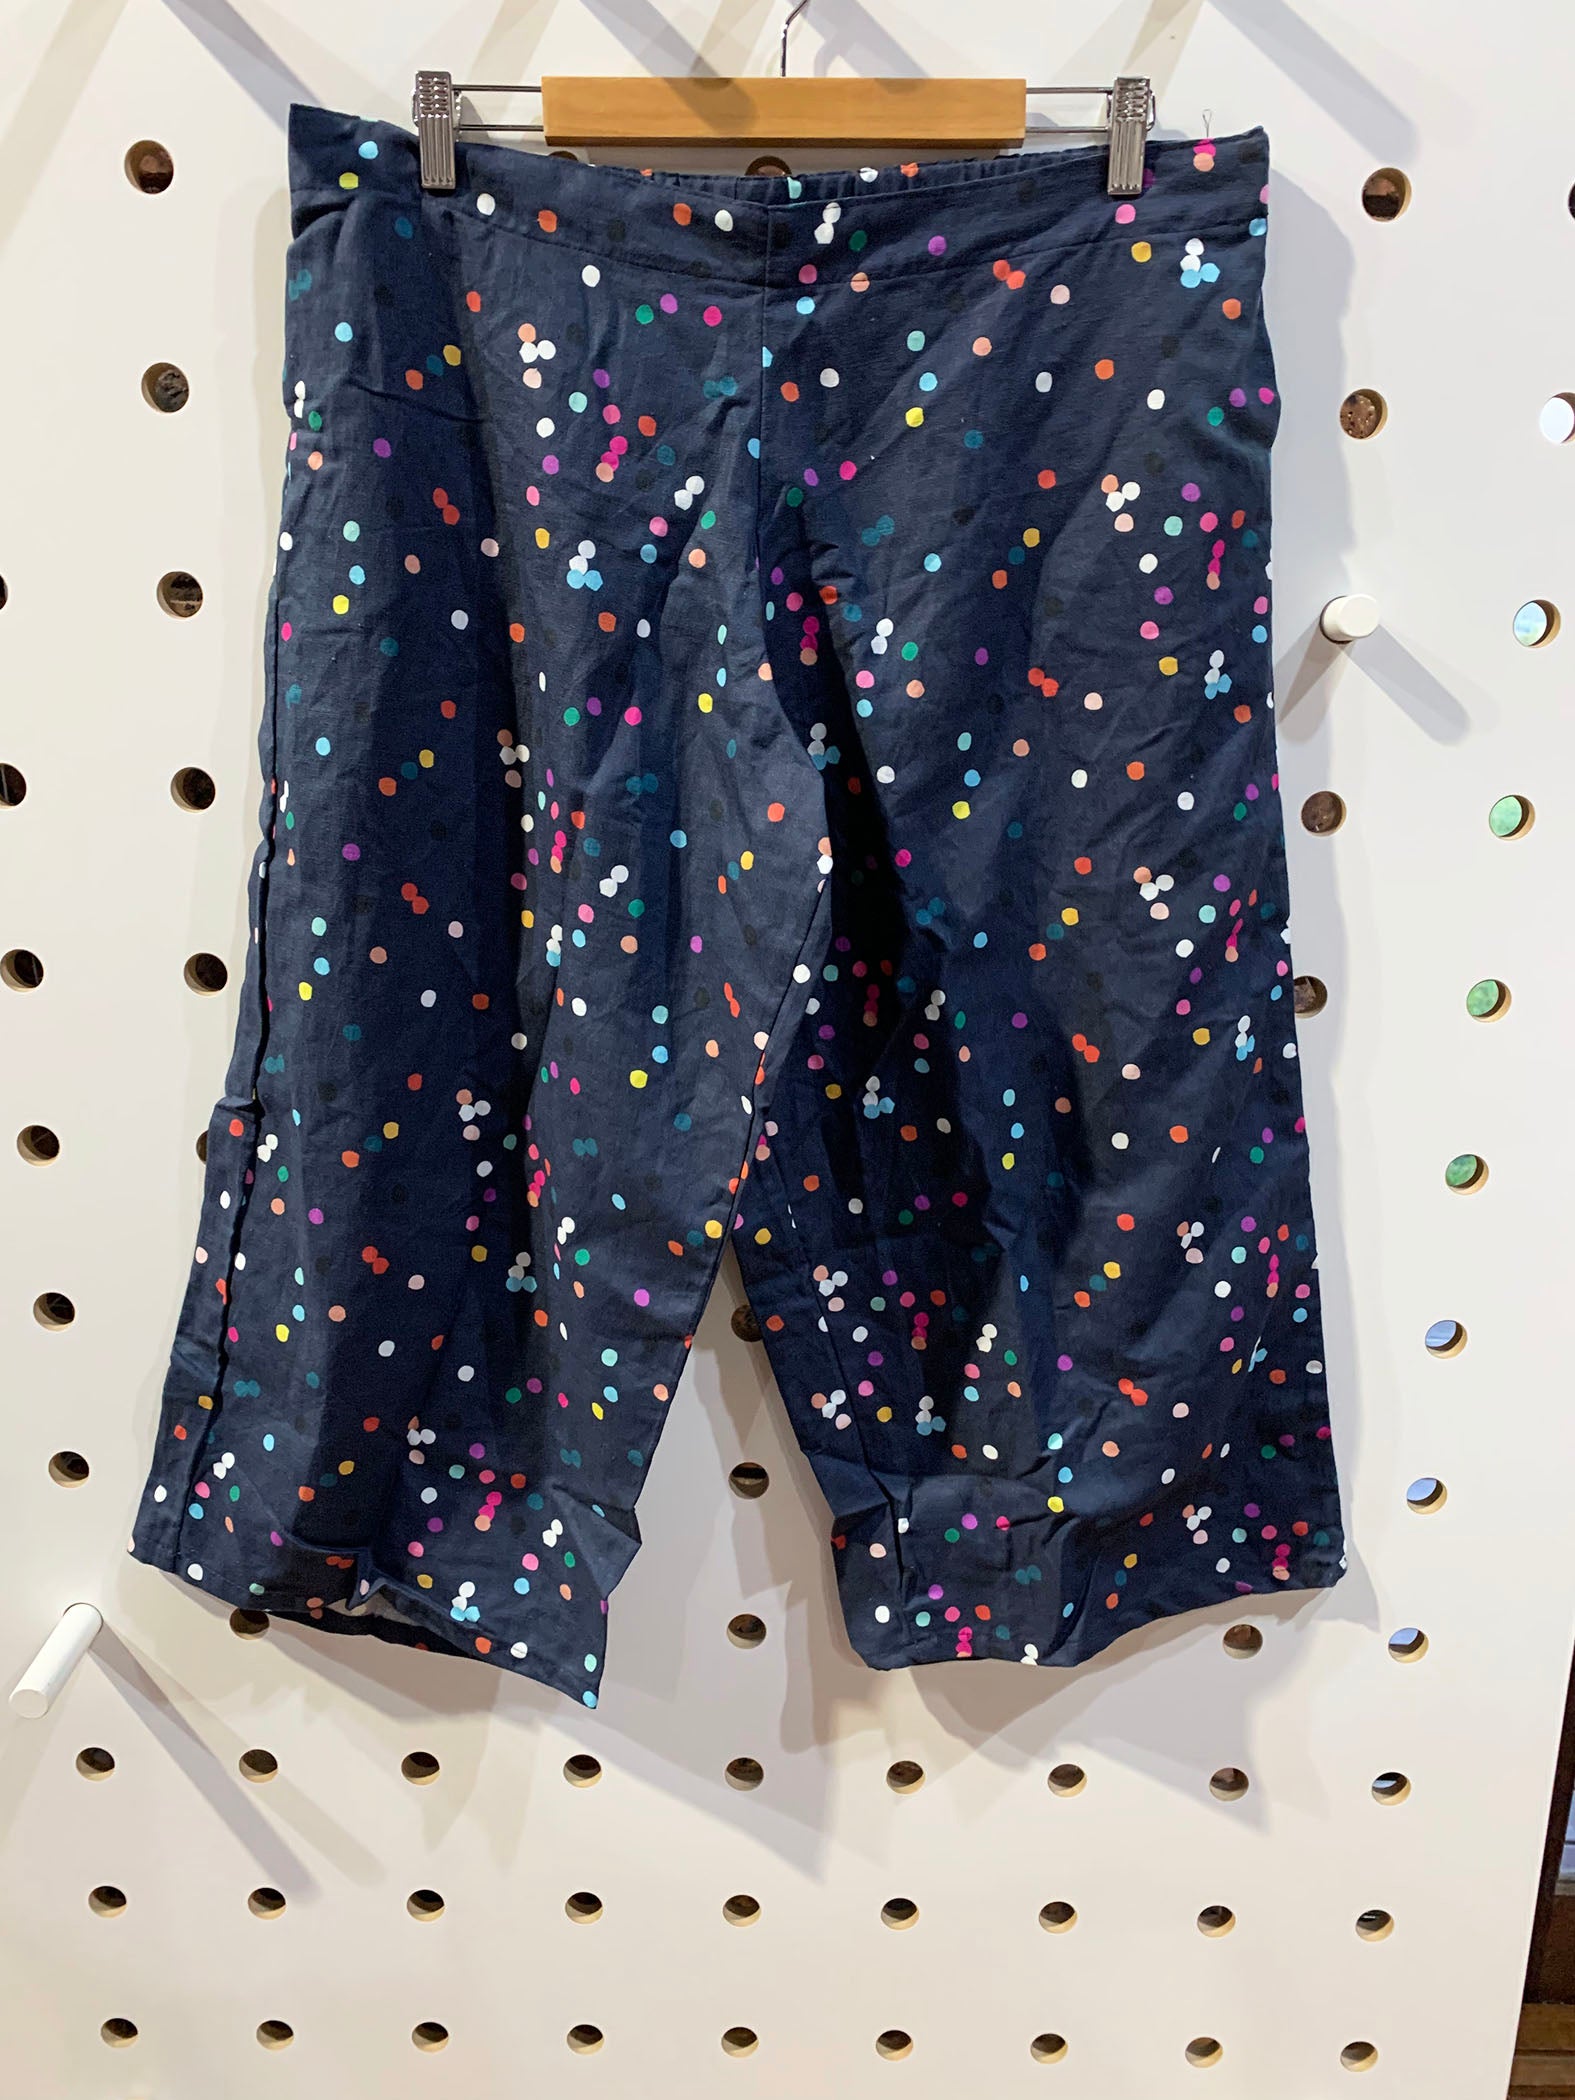 Confetti pants (unfinished project for someone)